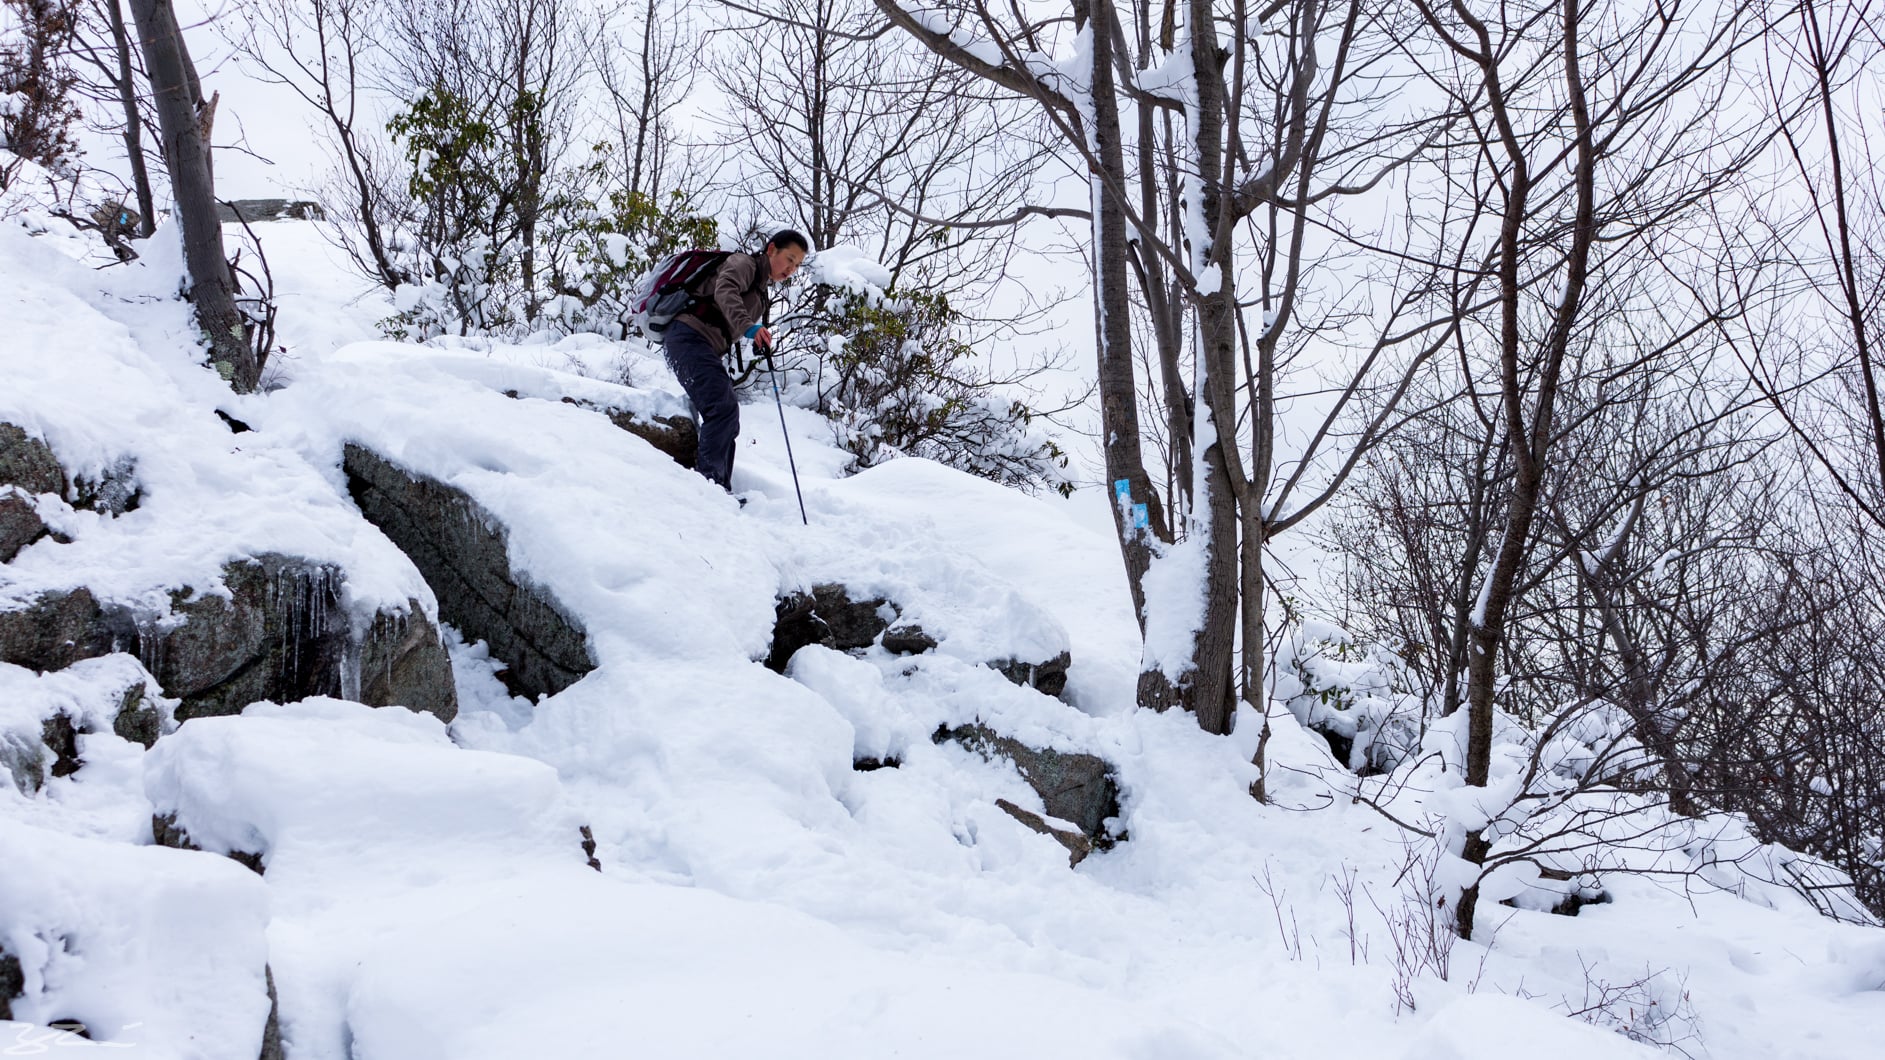 Hudson Valley Hiking: snow provides cushion if you ....